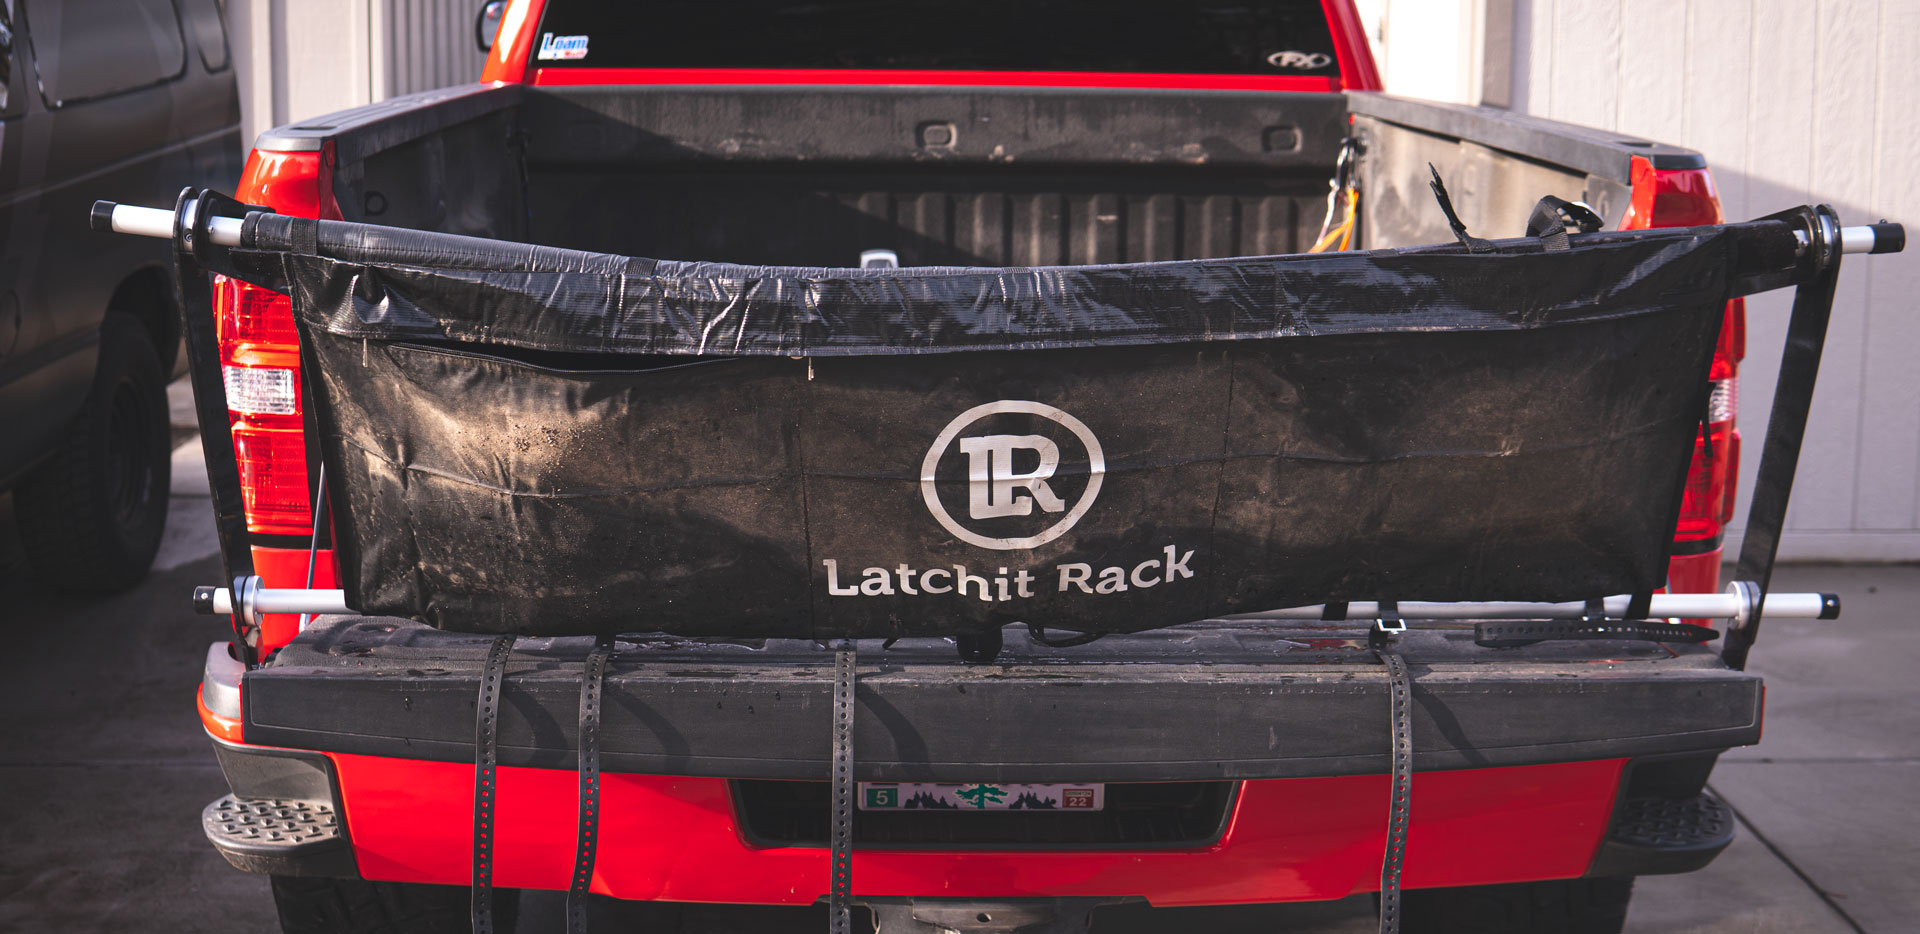 Latchit Rack Review